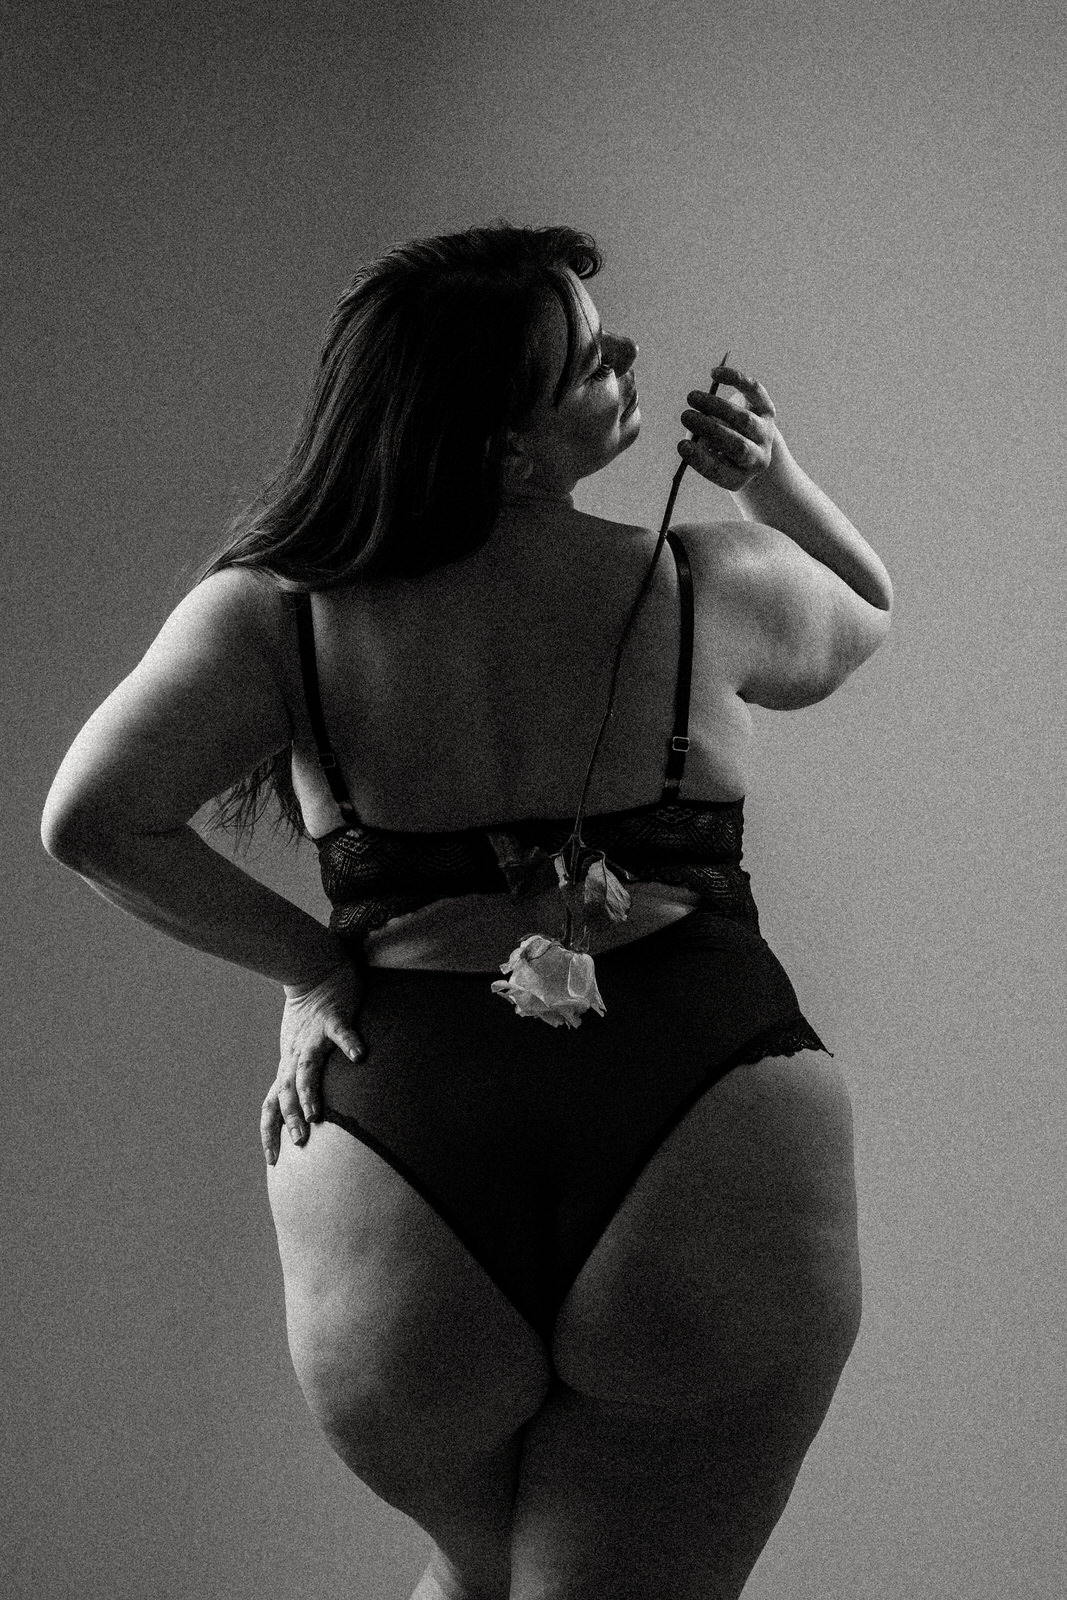 Plus size boudoir photo of a woman's back holding a rose over her shoulder hanging down her back